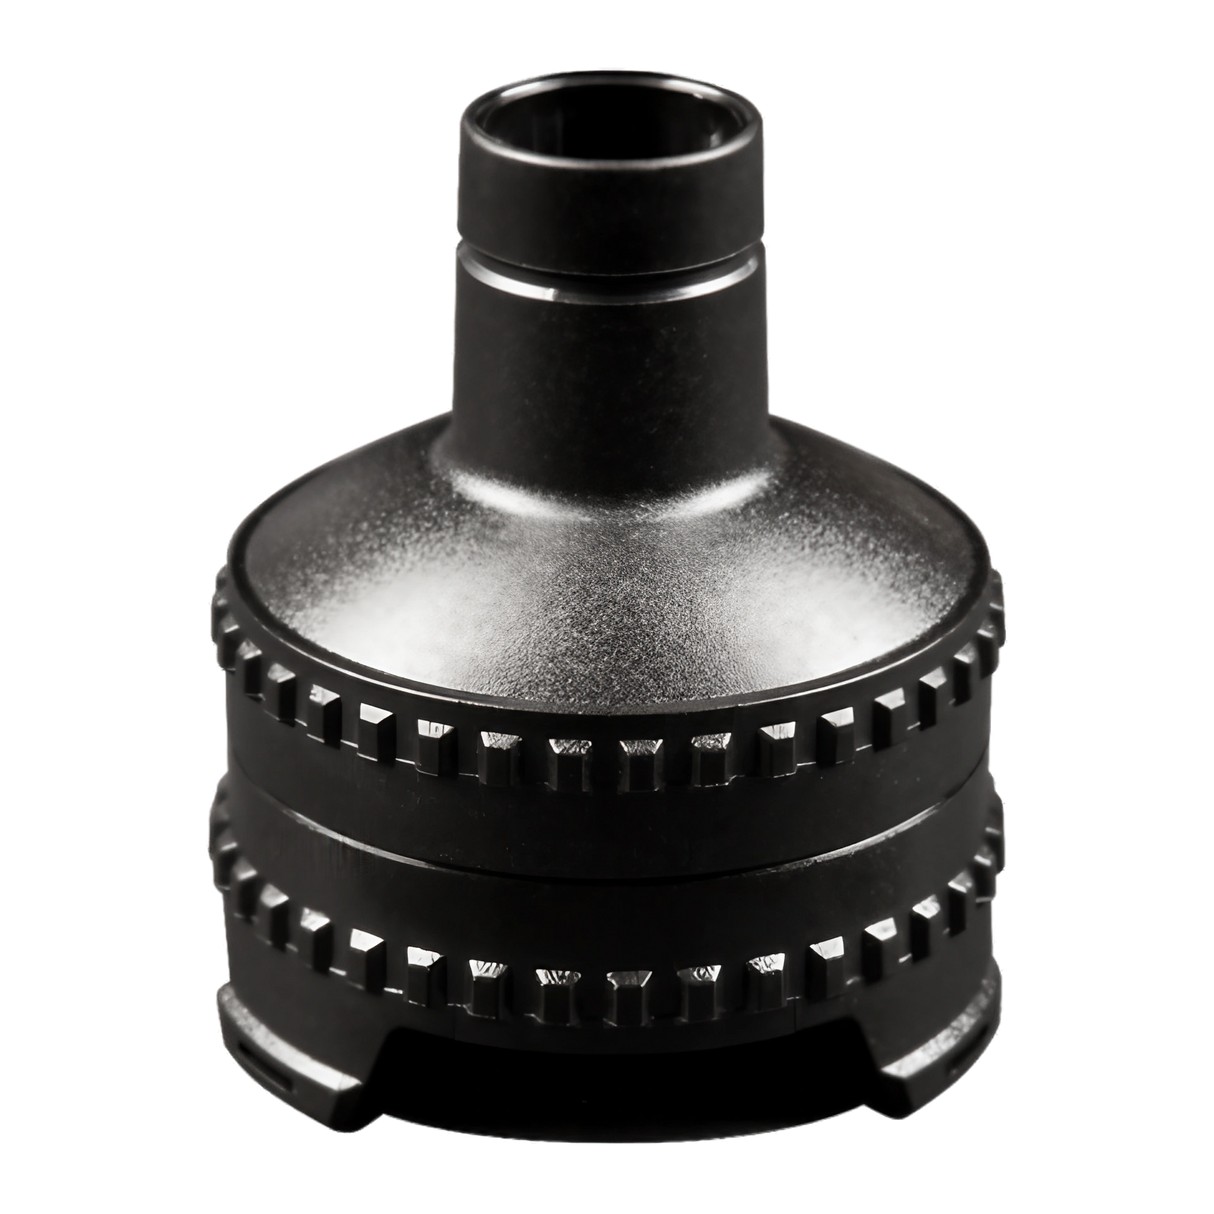 Storz & Bickel Easy Valve Filling Chamber Housing for Vaporizers, durable plastic, front view